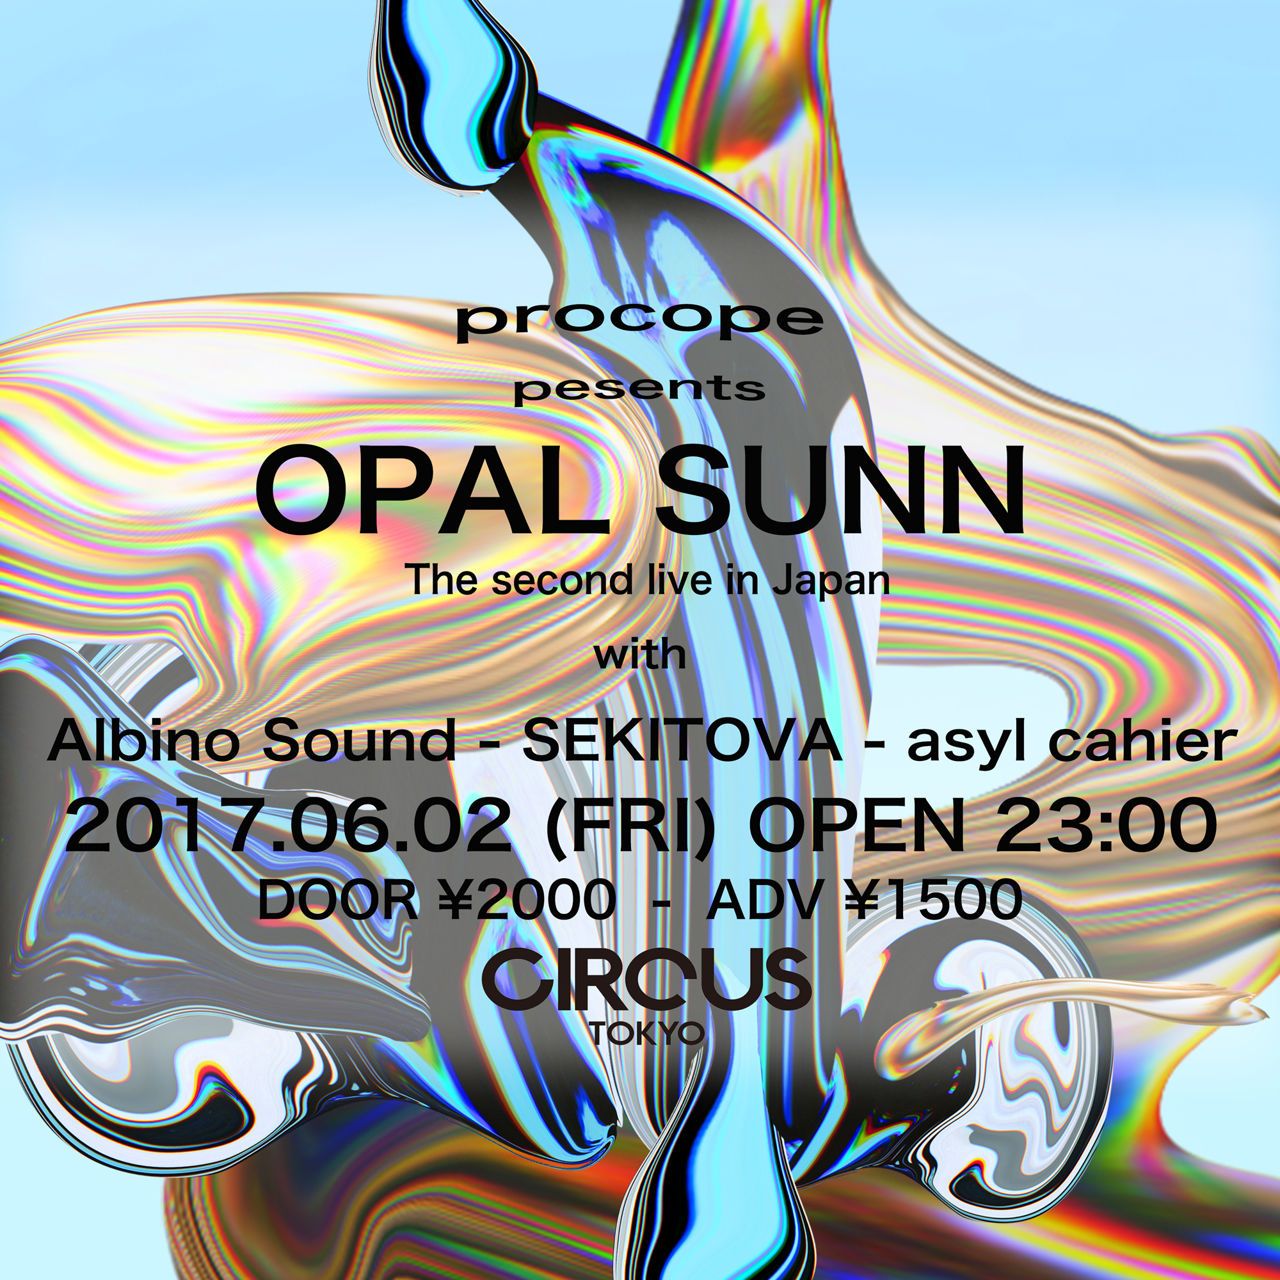 Opal Sunn : The second live in Japan